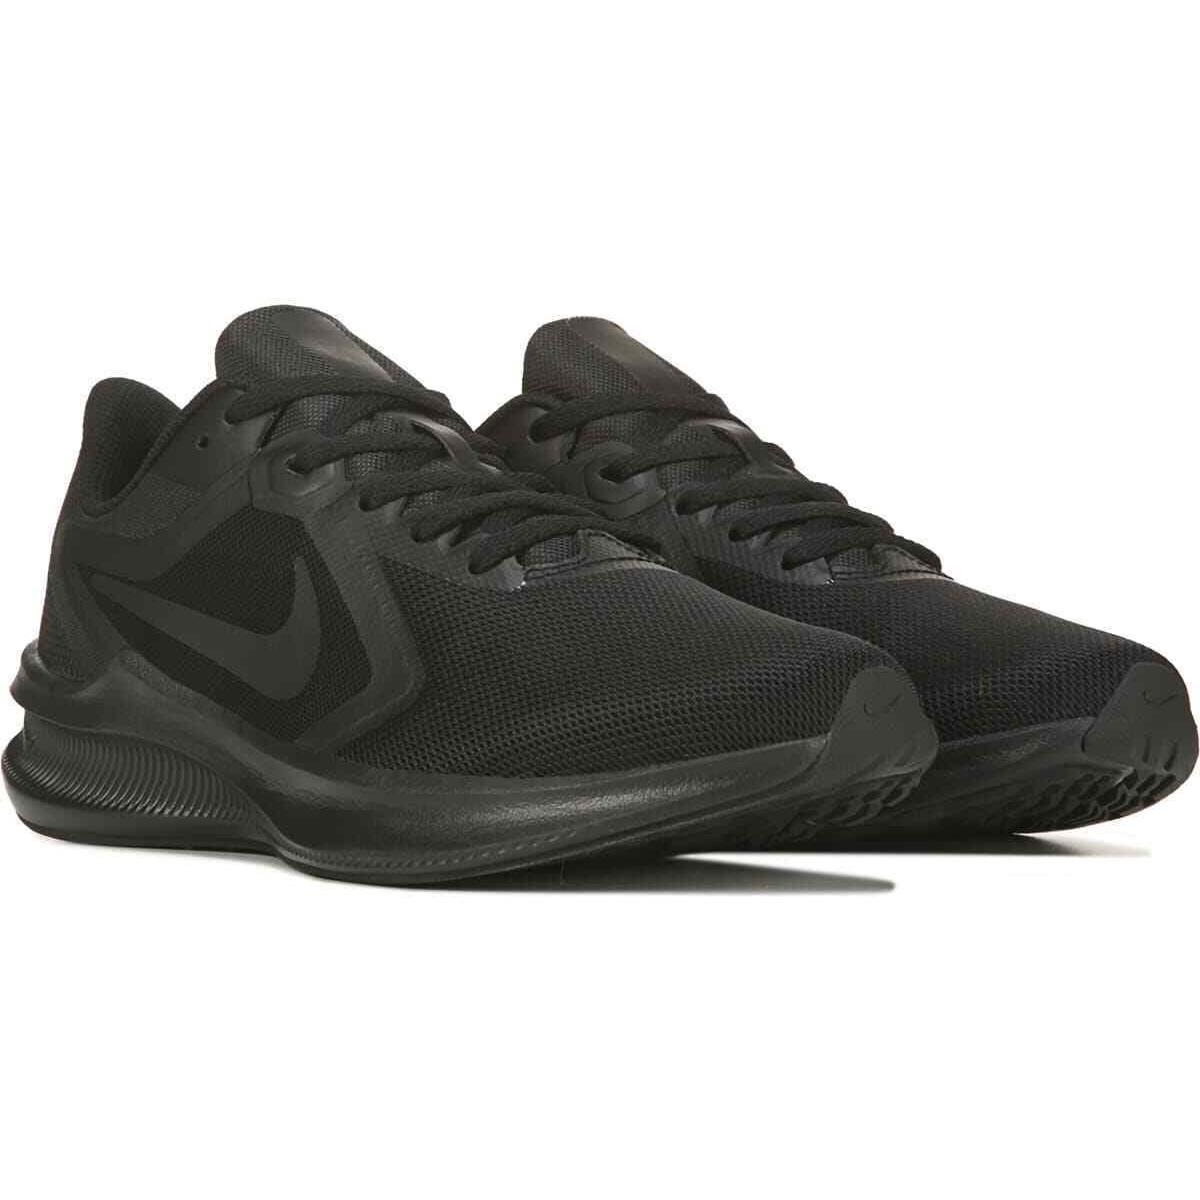 Nike Women`s 11 Downshifter 10 All Black Athletic Tennis Shoes Sneaker Running